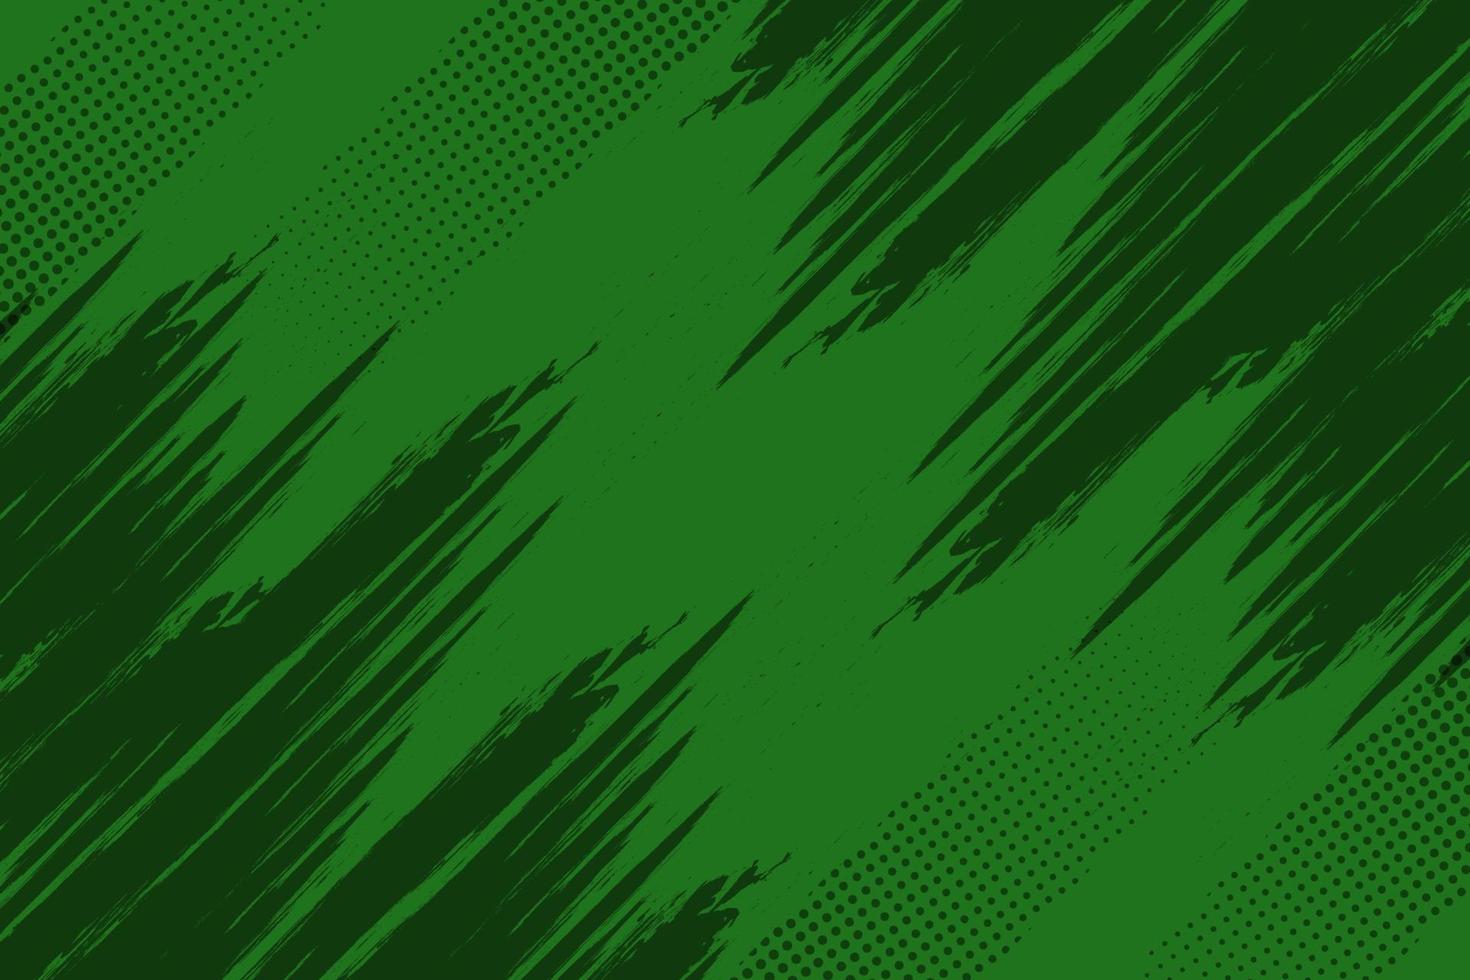 Green abstract grunge texture with halftone background vector